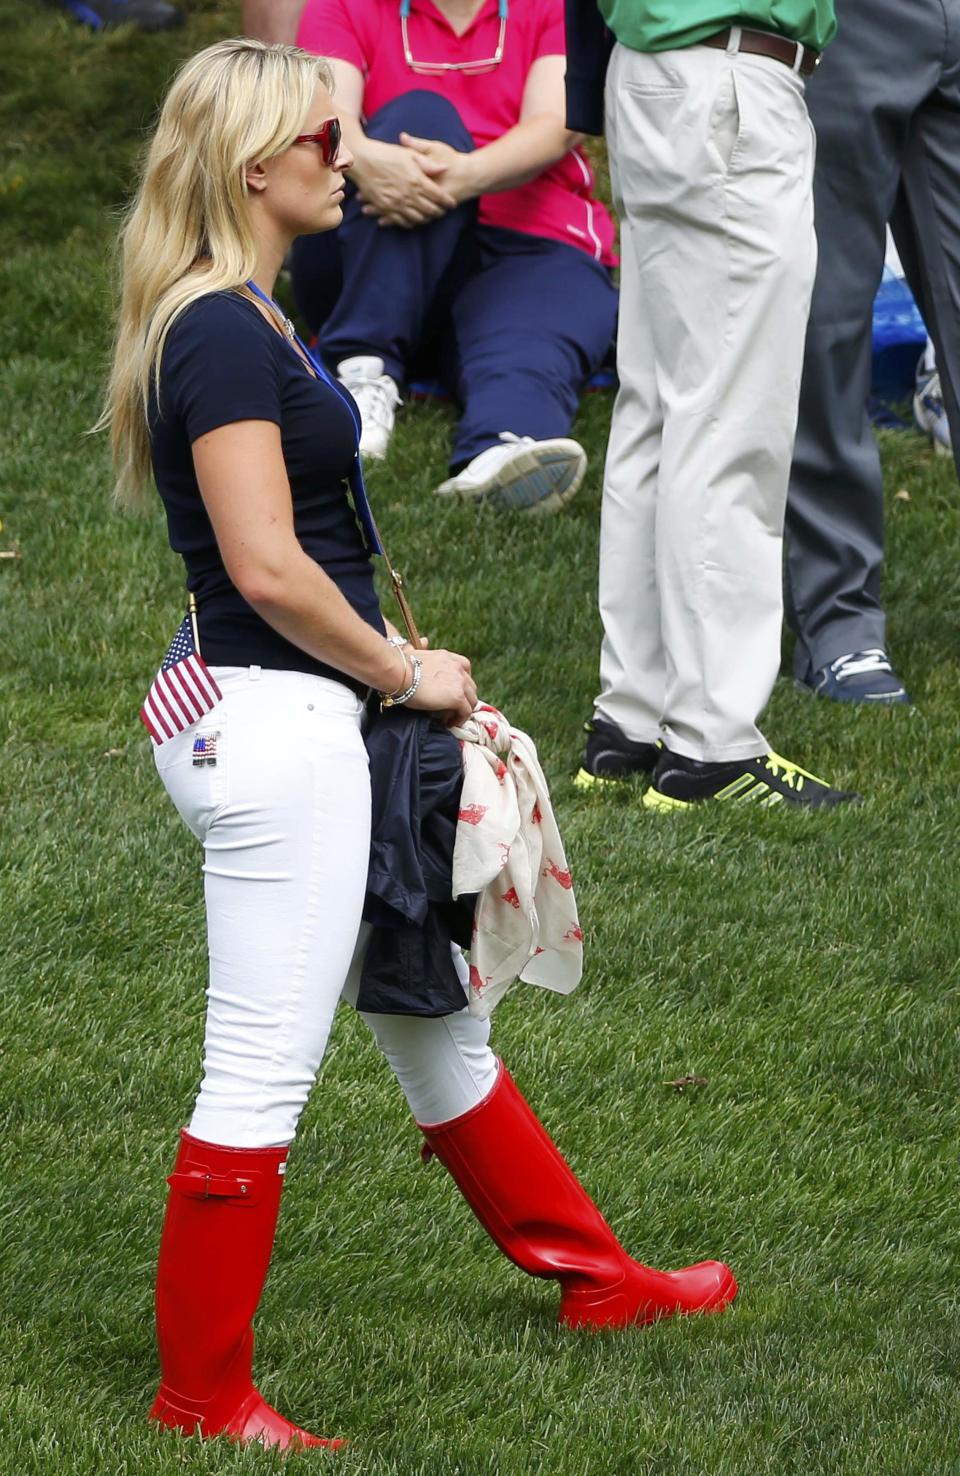 Tiger Woods girlfriend Lindsey Vonn watches Woods in the opening Four-ball matches for the 2013 Presidents Cup golf tournament at Muirfield Village Golf Club in Dublin, Ohio October 3, 2013. REUTERS/Jeff Haynes (UNITED STATES - Tags: SPORT GOLF)